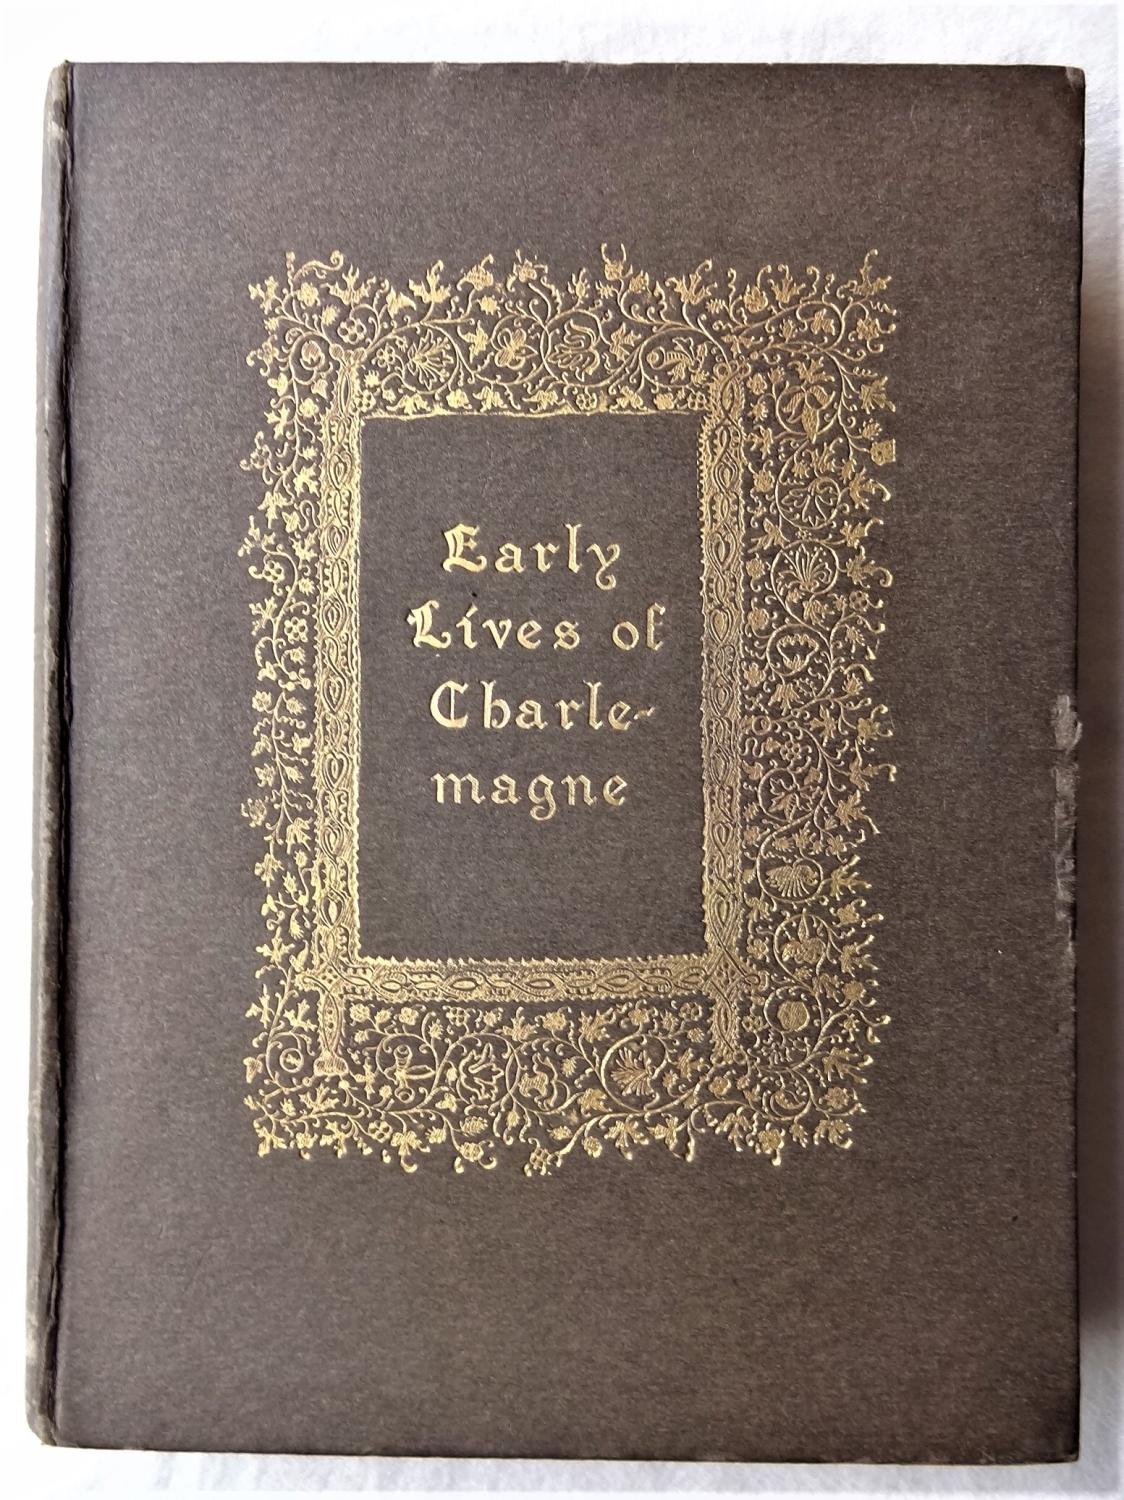 EARLY LIVES OF CHARLEMAGNE By Eginhard & The Monk of St Gall by GRANT ...